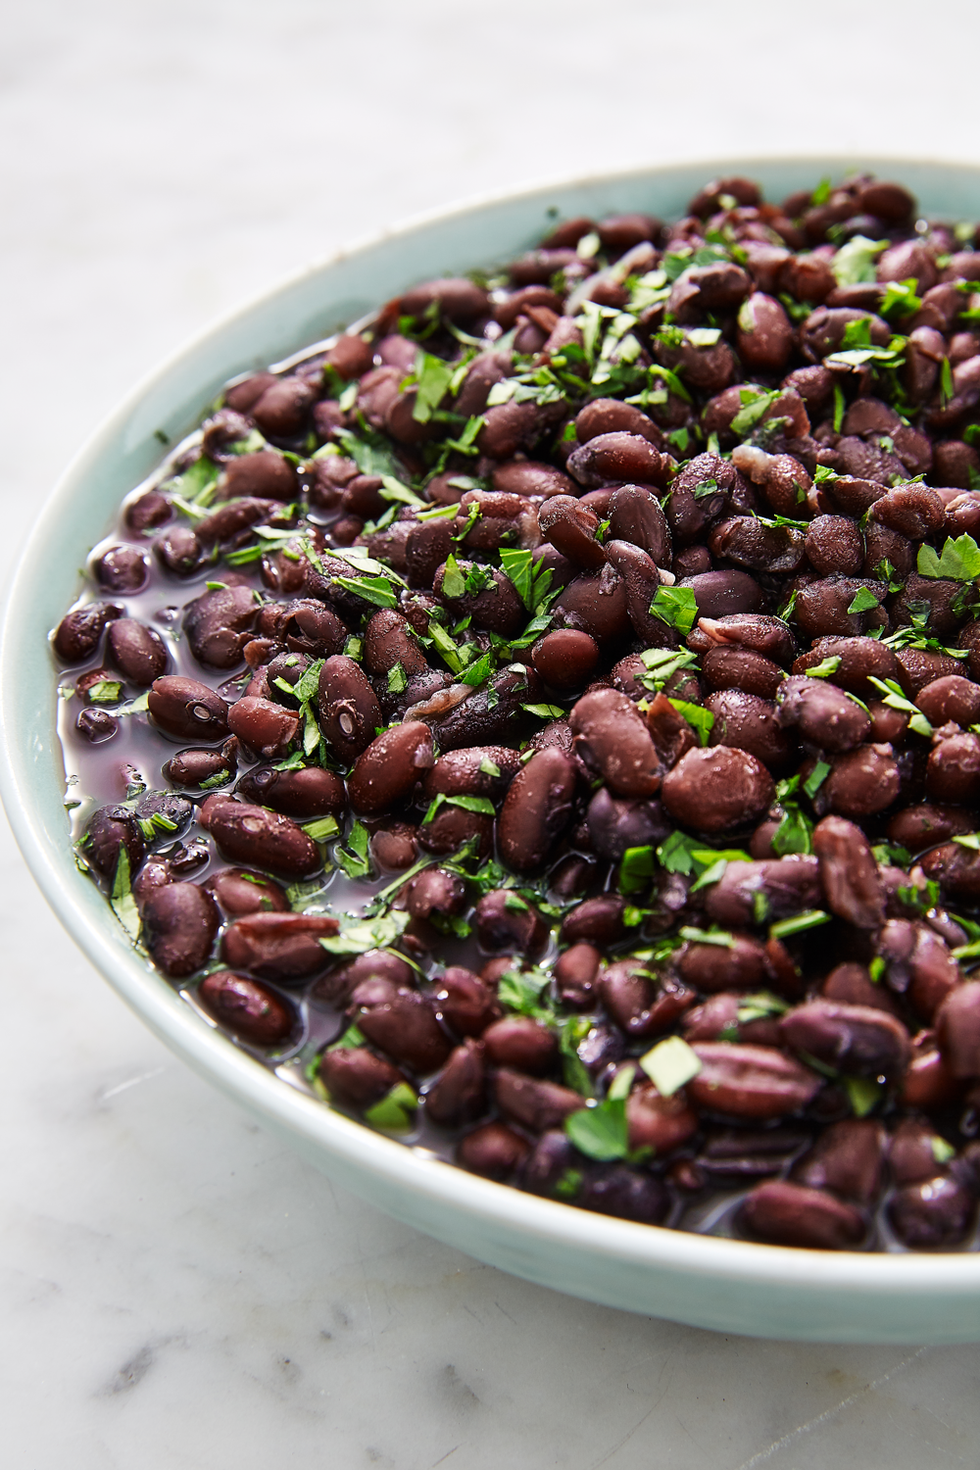 https://hips.hearstapps.com/hmg-prod/images/how-to-cook-black-beans-vertical-1545408465.png?crop=1xw:1xh;center,top&resize=980:*